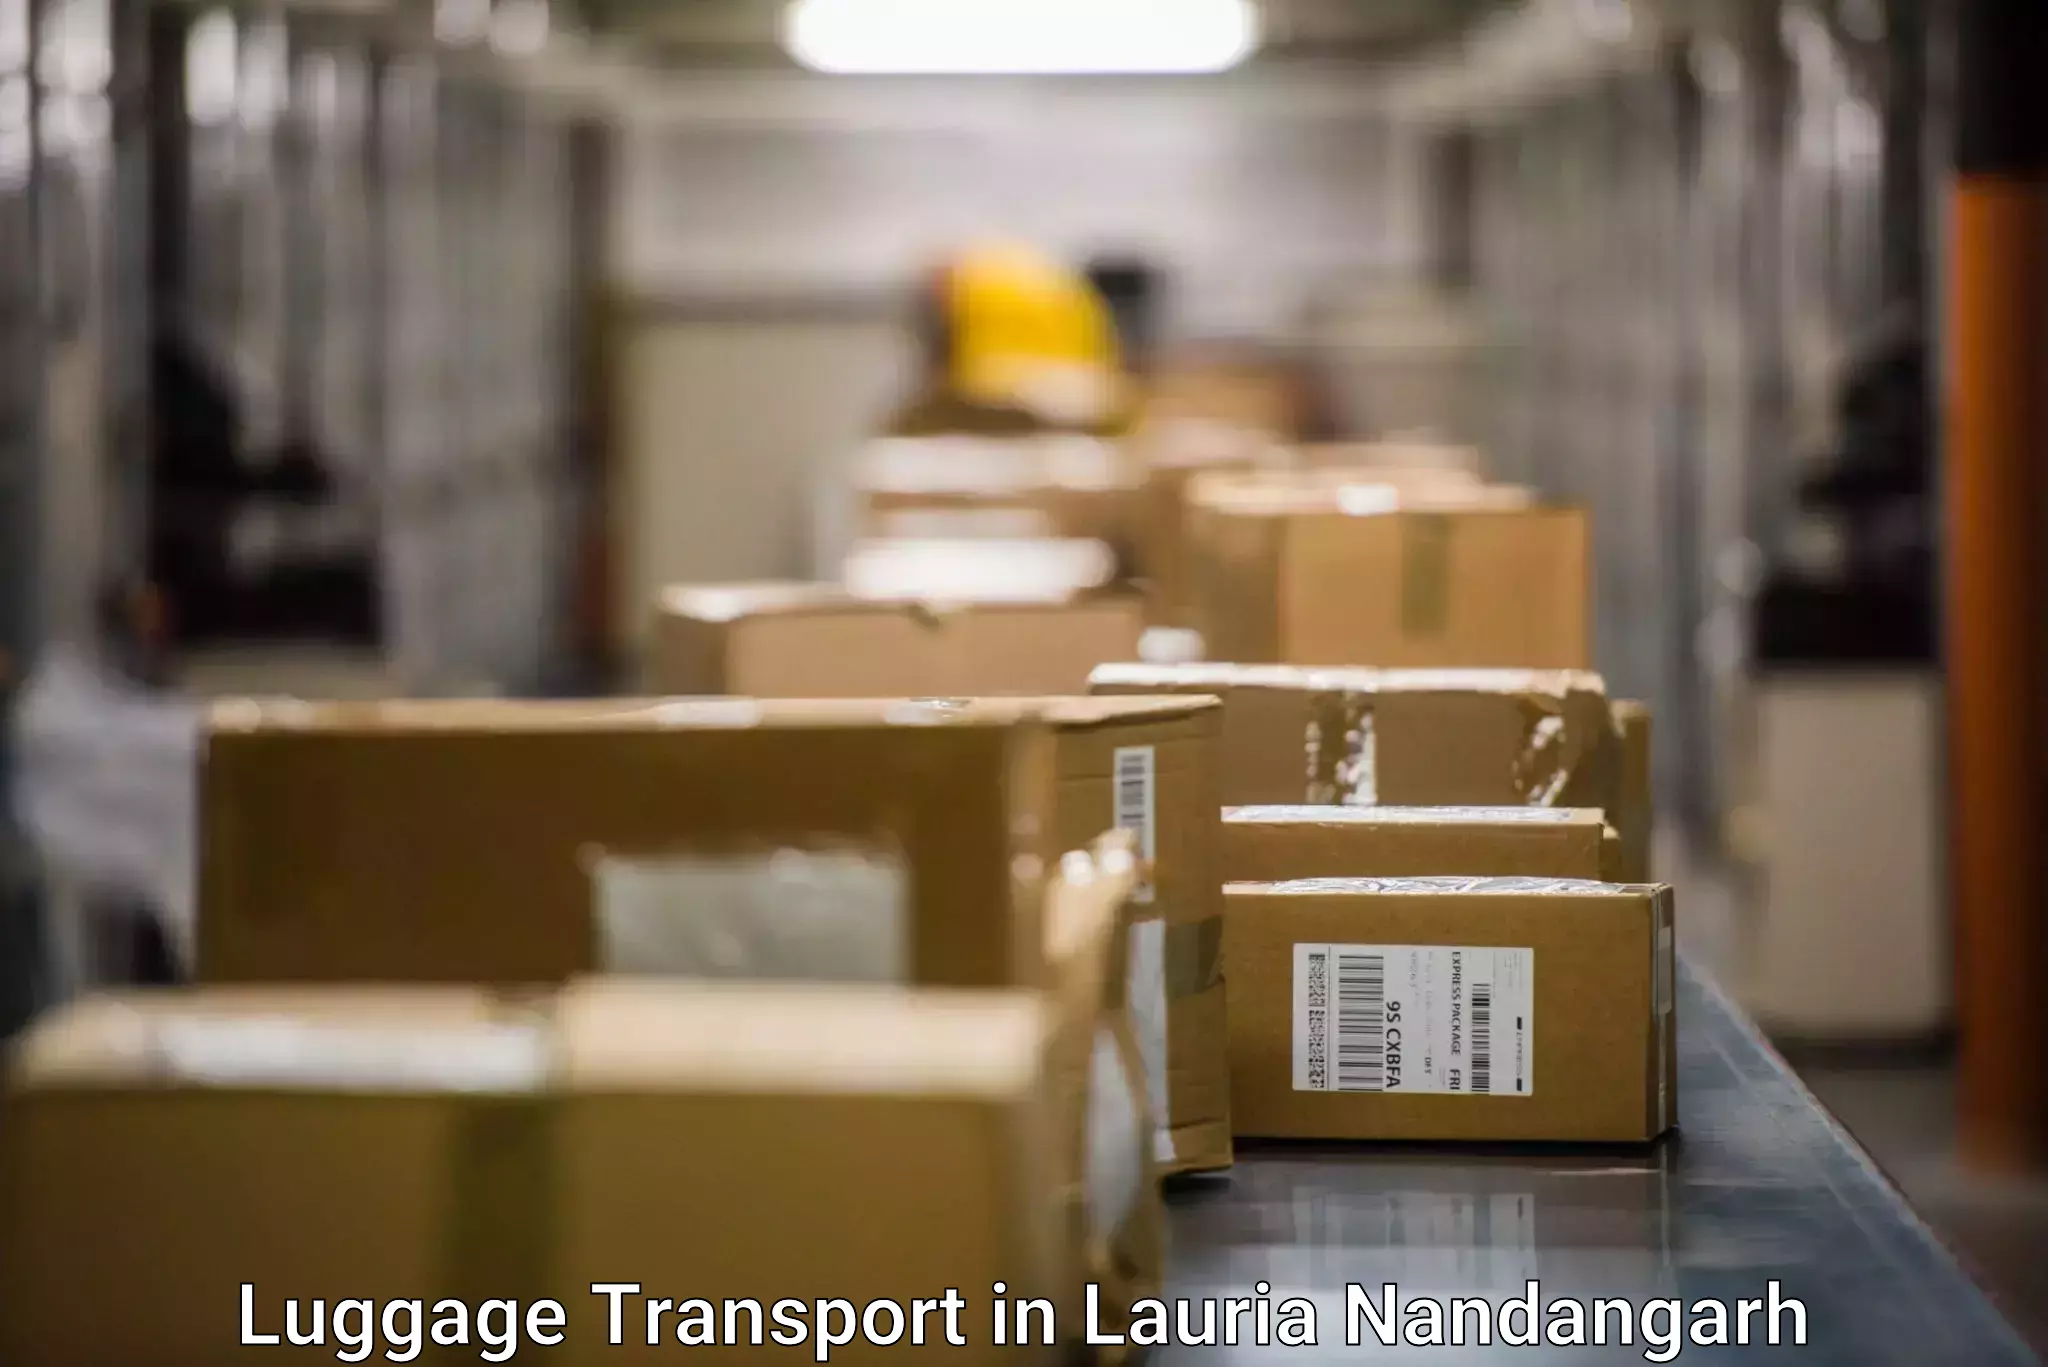 Baggage transport cost in Lauria Nandangarh